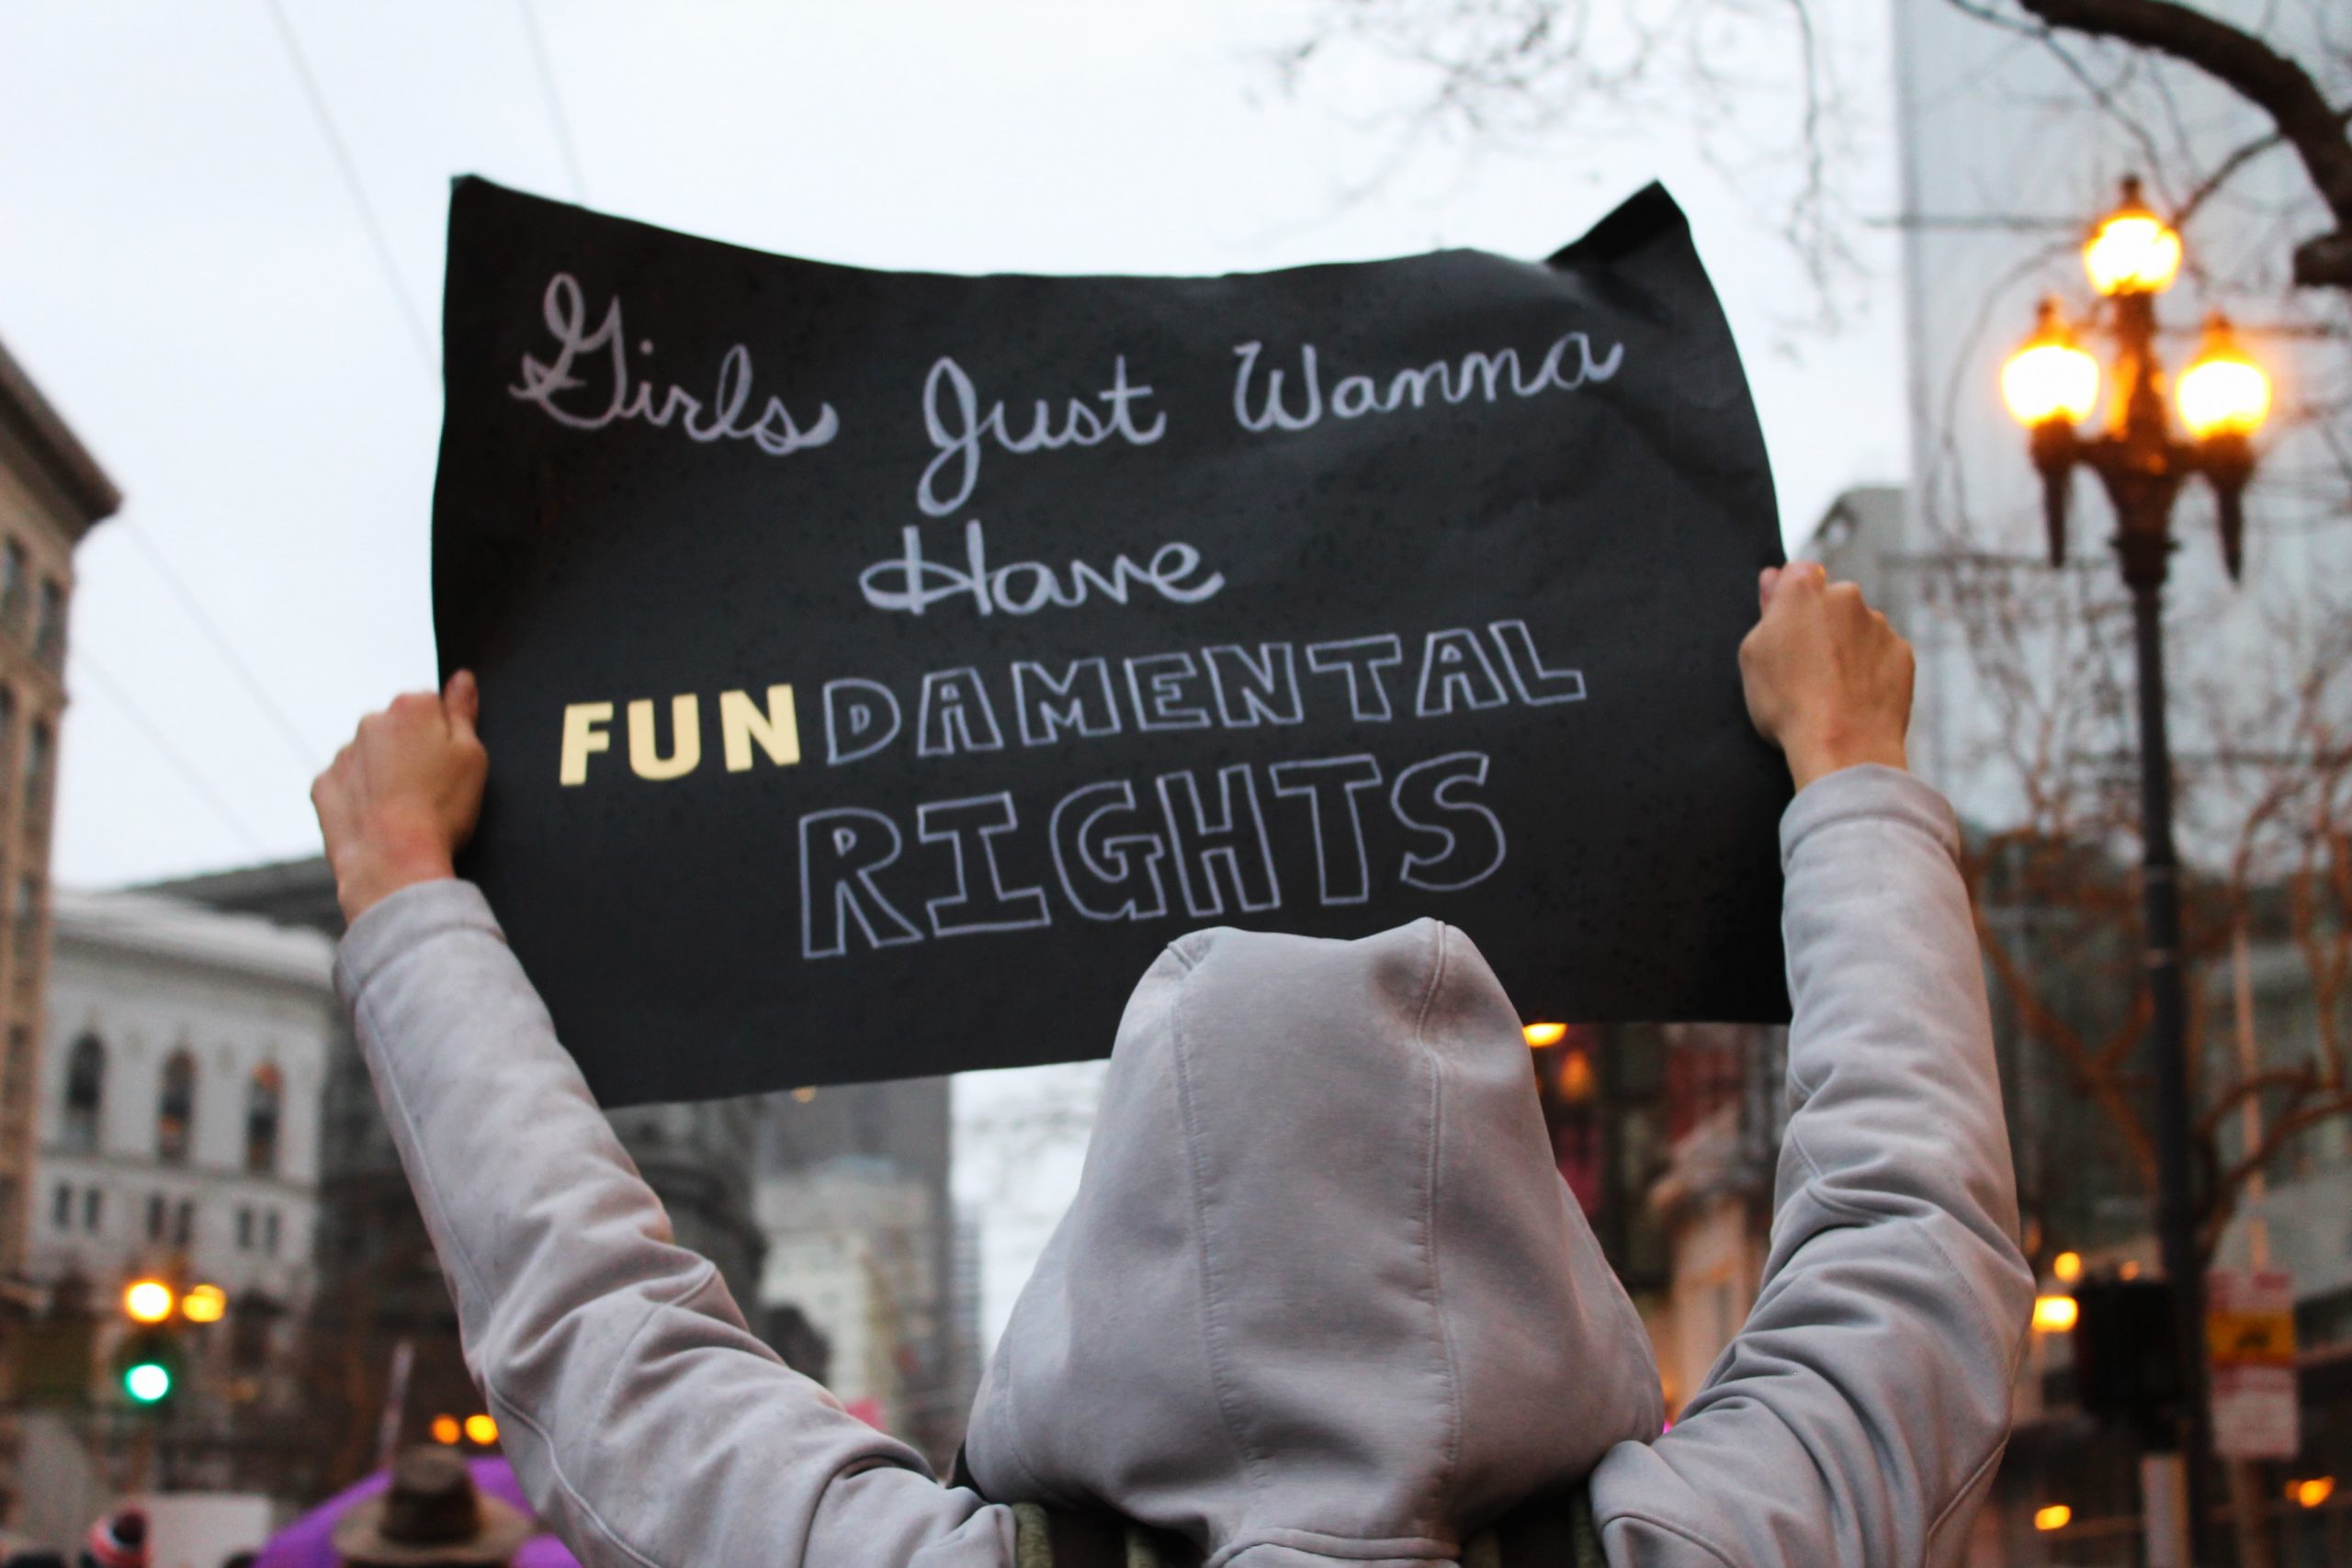 Schild "Girls just want to have fun damental Rights